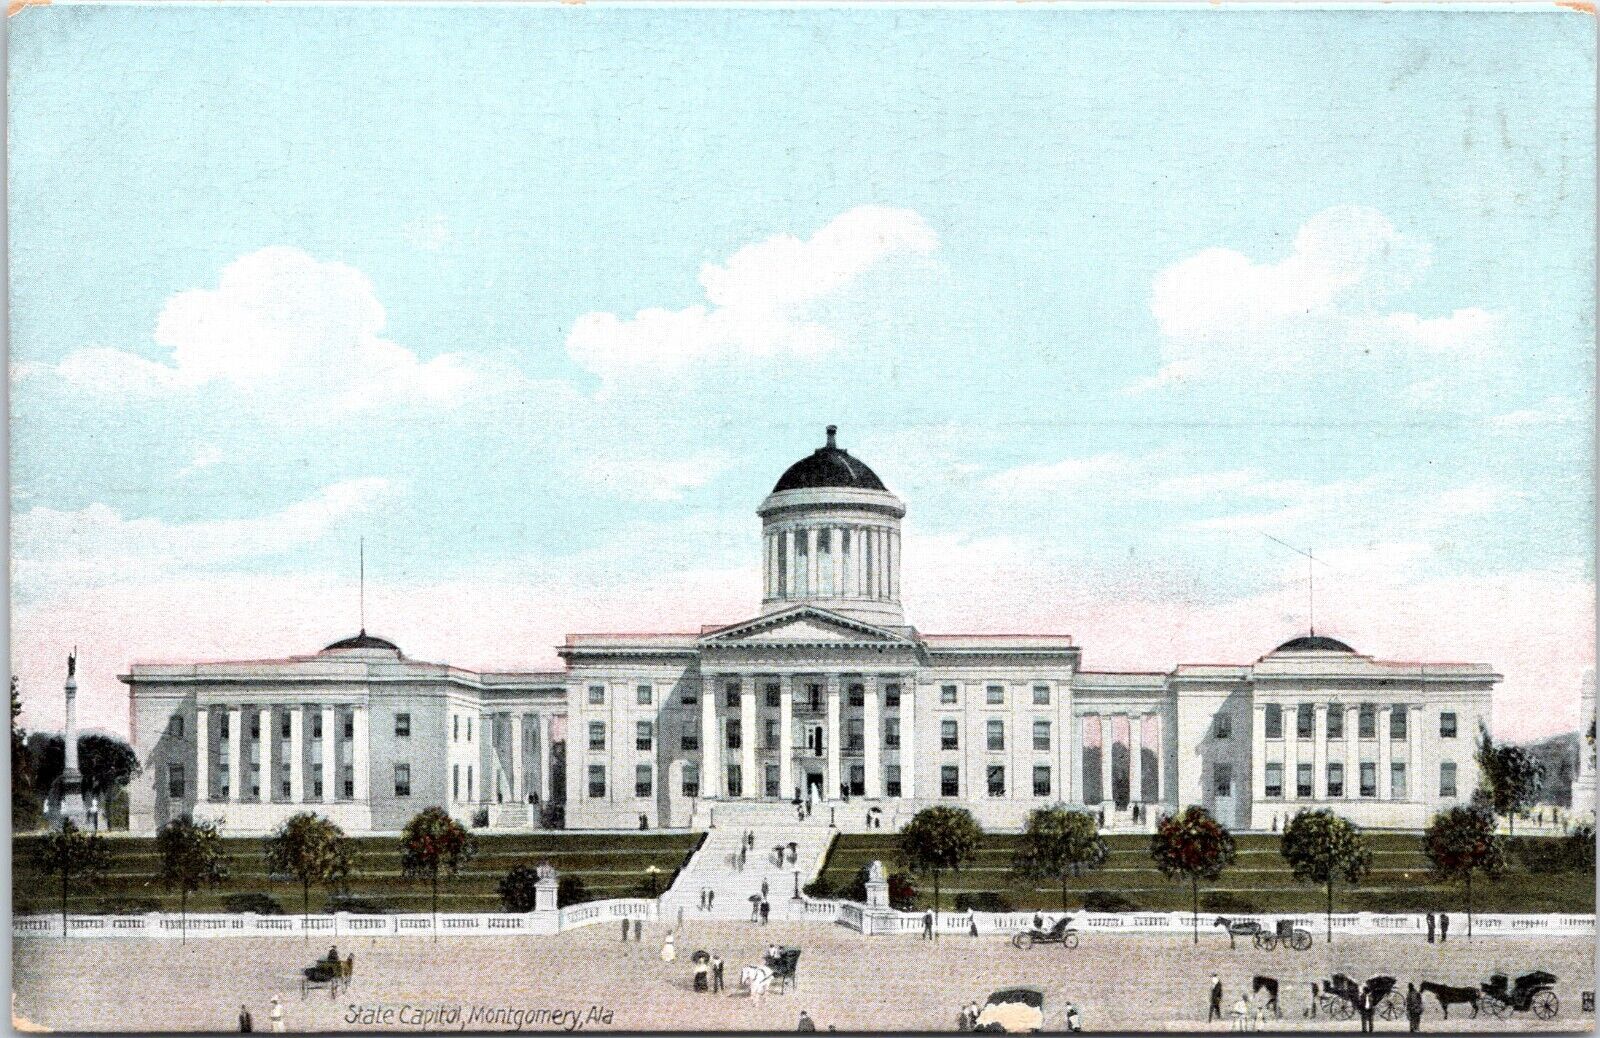 State Capitol, Montgomery, Alabama - Divided Back Postcard c1907-1915